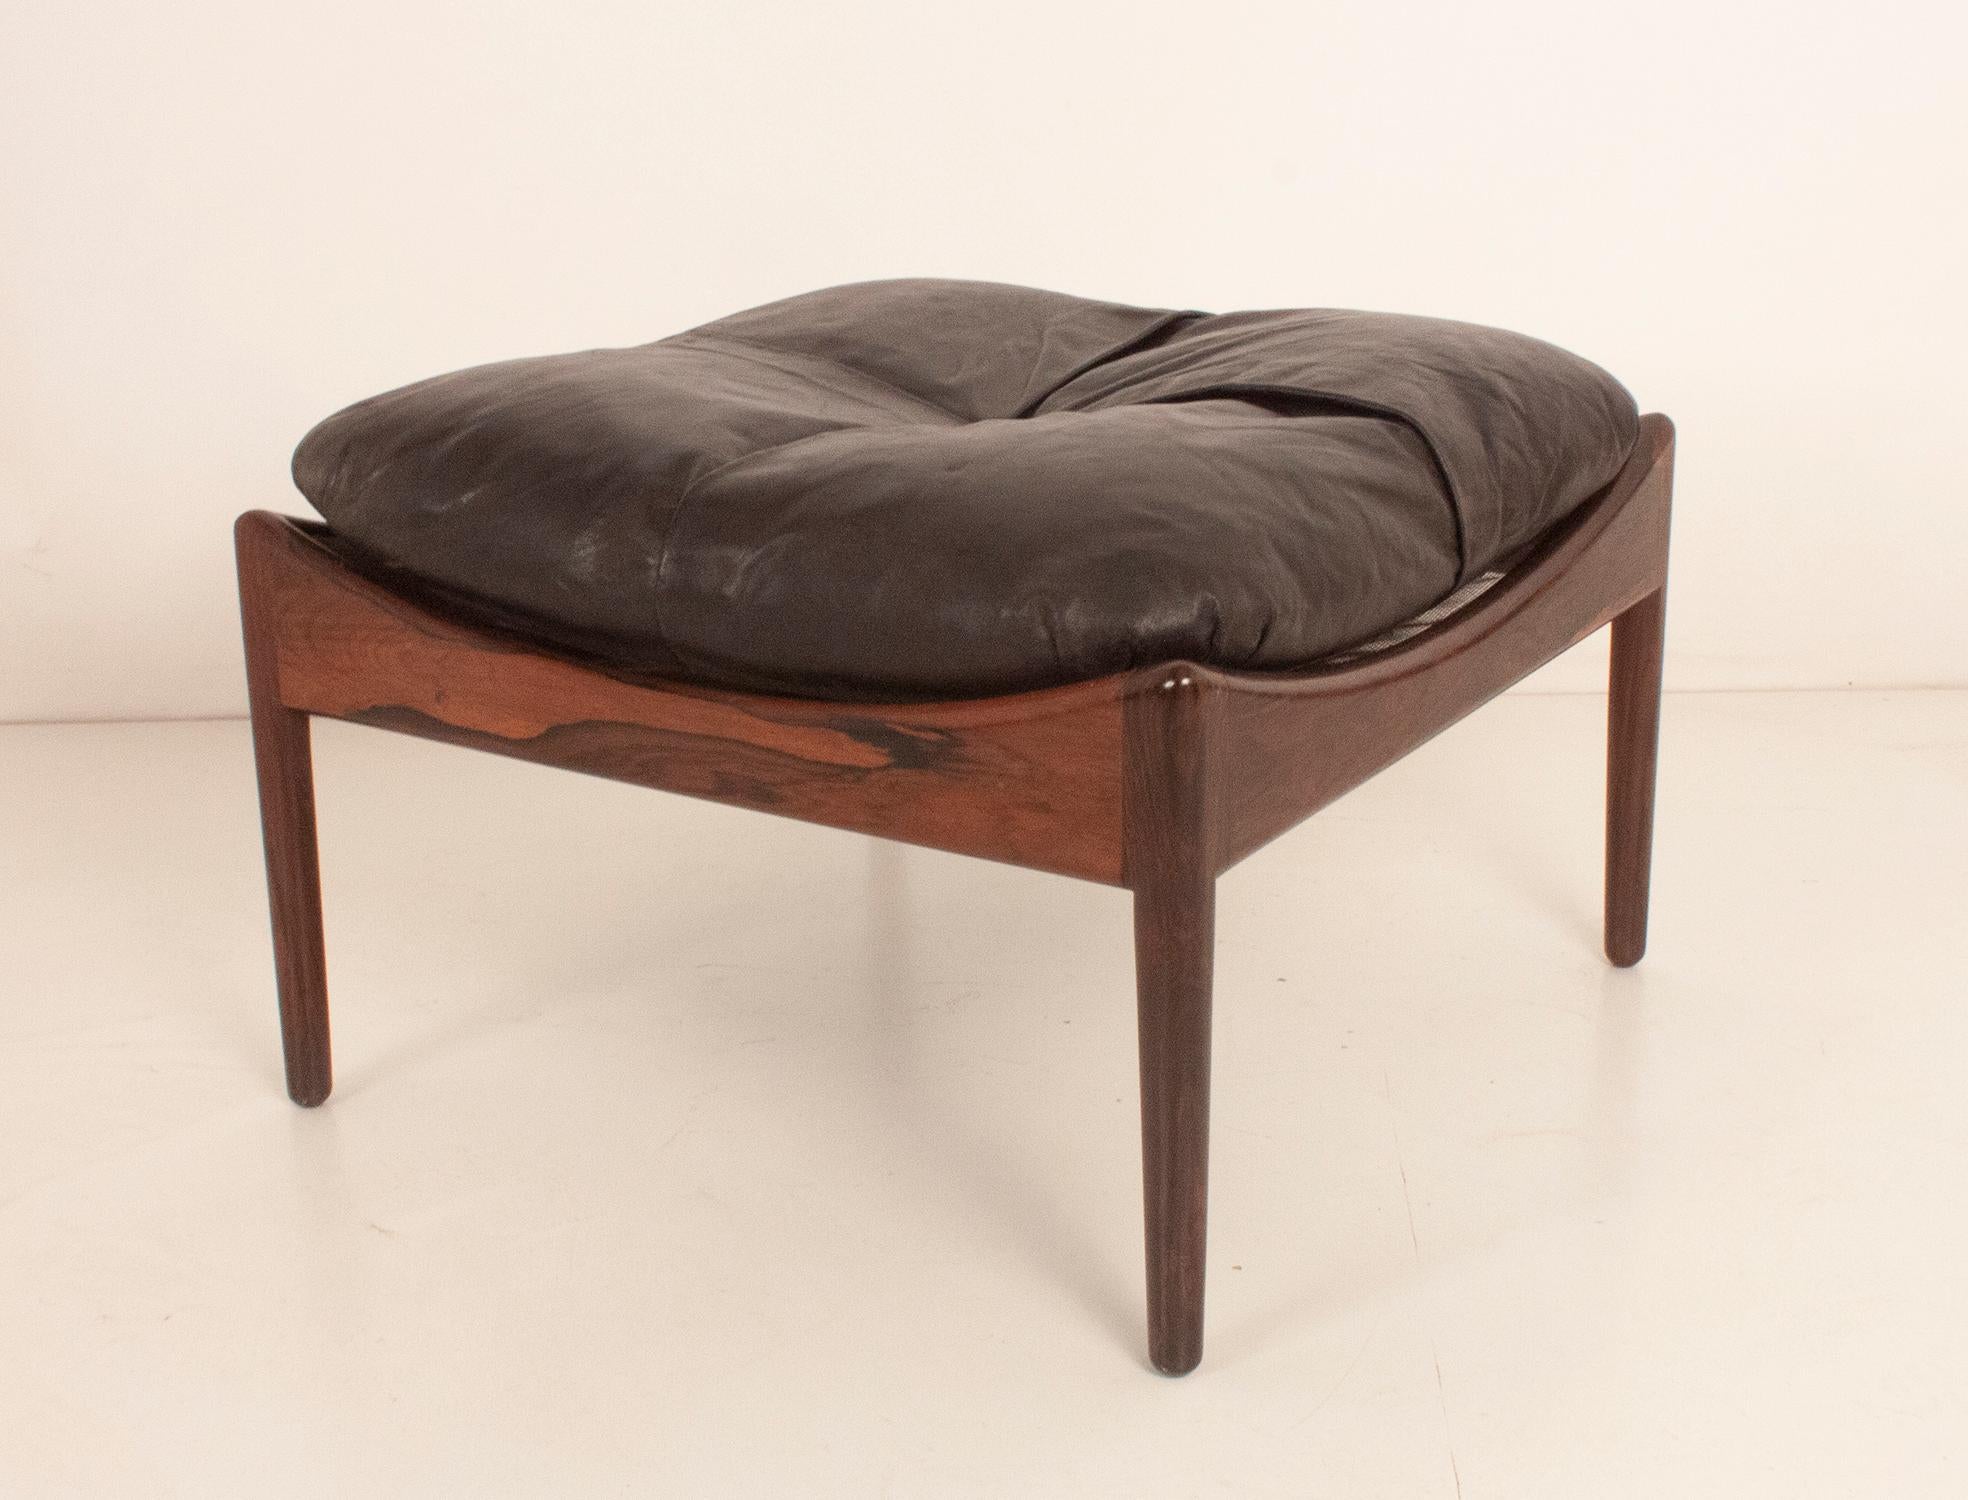 Nice ottoman in good condition. Made of beautiful wood and quality black leather.
It has a very elegant design and is also very practical.
It is in very good condition.
Hard to find these exclusive pieces.